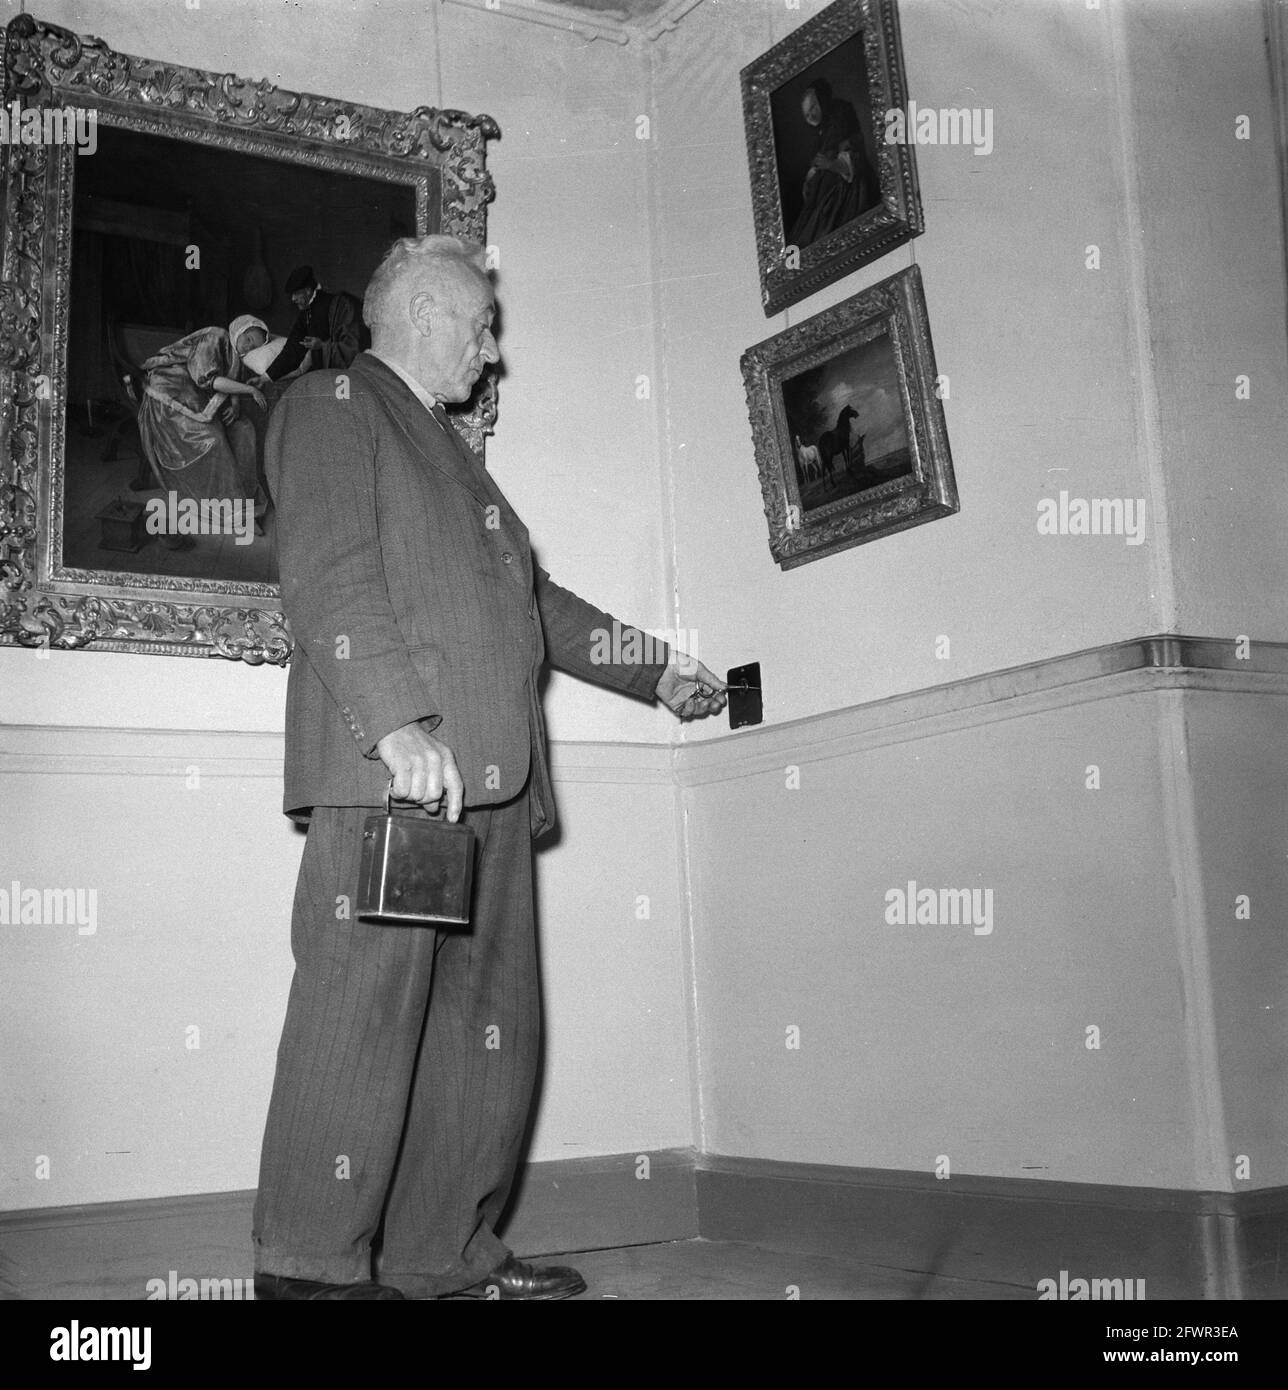 [Night watchman makes his rounds], July 1945, museums, exhibitions, The Netherlands, 20th century press agency photo, news to remember, documentary, historic photography 1945-1990, visual stories, human history of the Twentieth Century, capturing moments in time Stock Photo